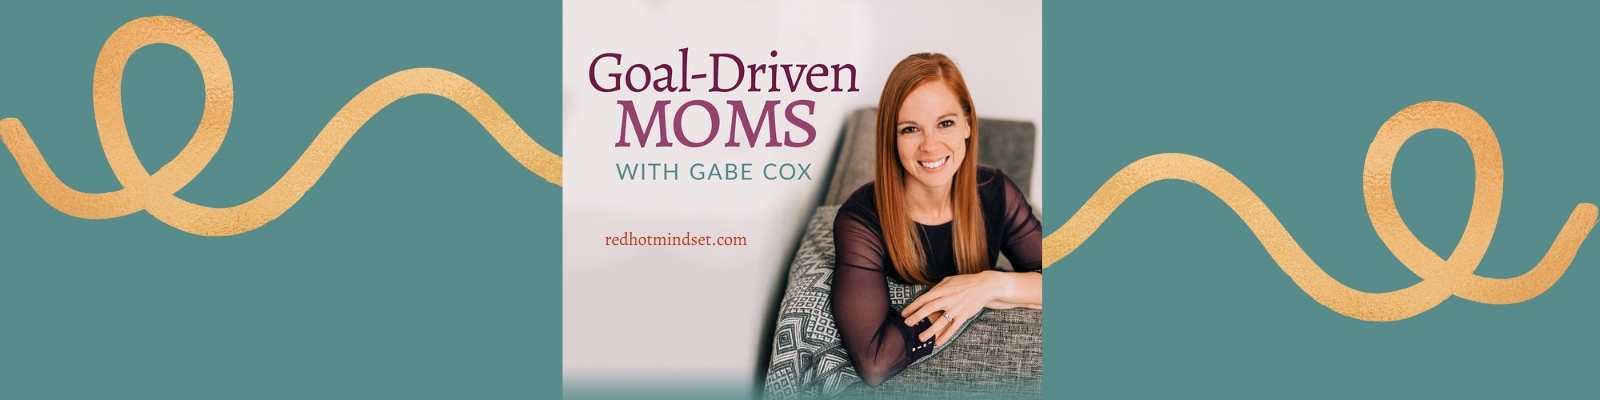 Goal-Driven Moms - Discover My Passions, Clarify My Goals, Simplify Goal Planning, Create Intentional Habits